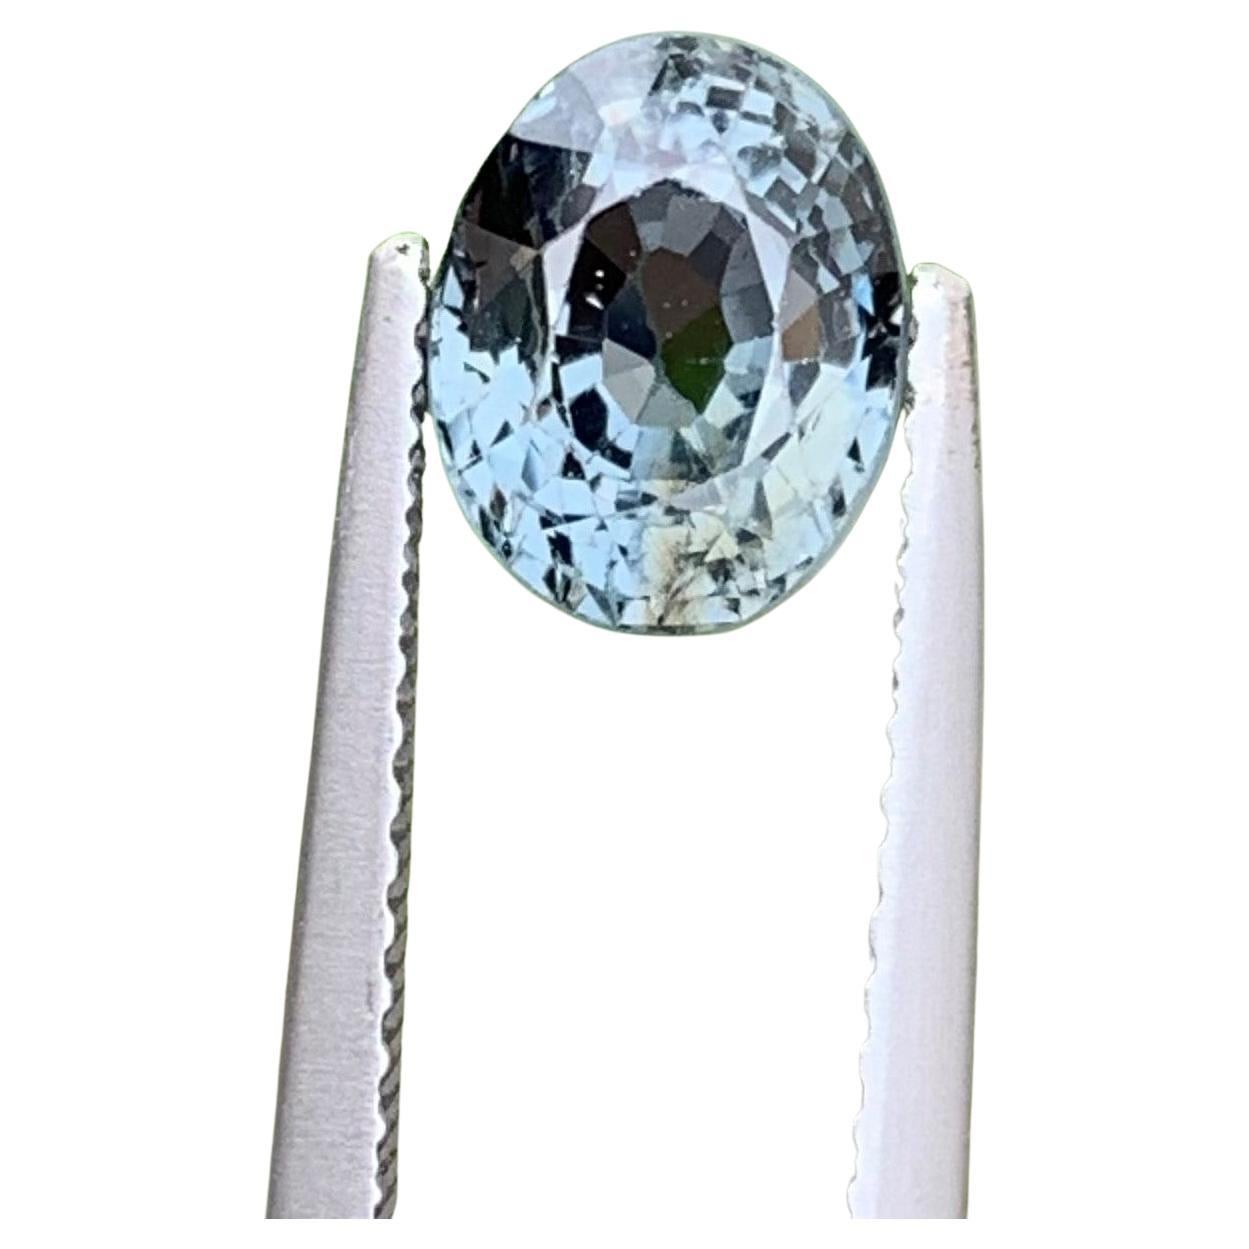 Gorgeous 2.15 Carat Natural Loose Gray Spinel Oval Mixed Cut from Burma Mine For Sale